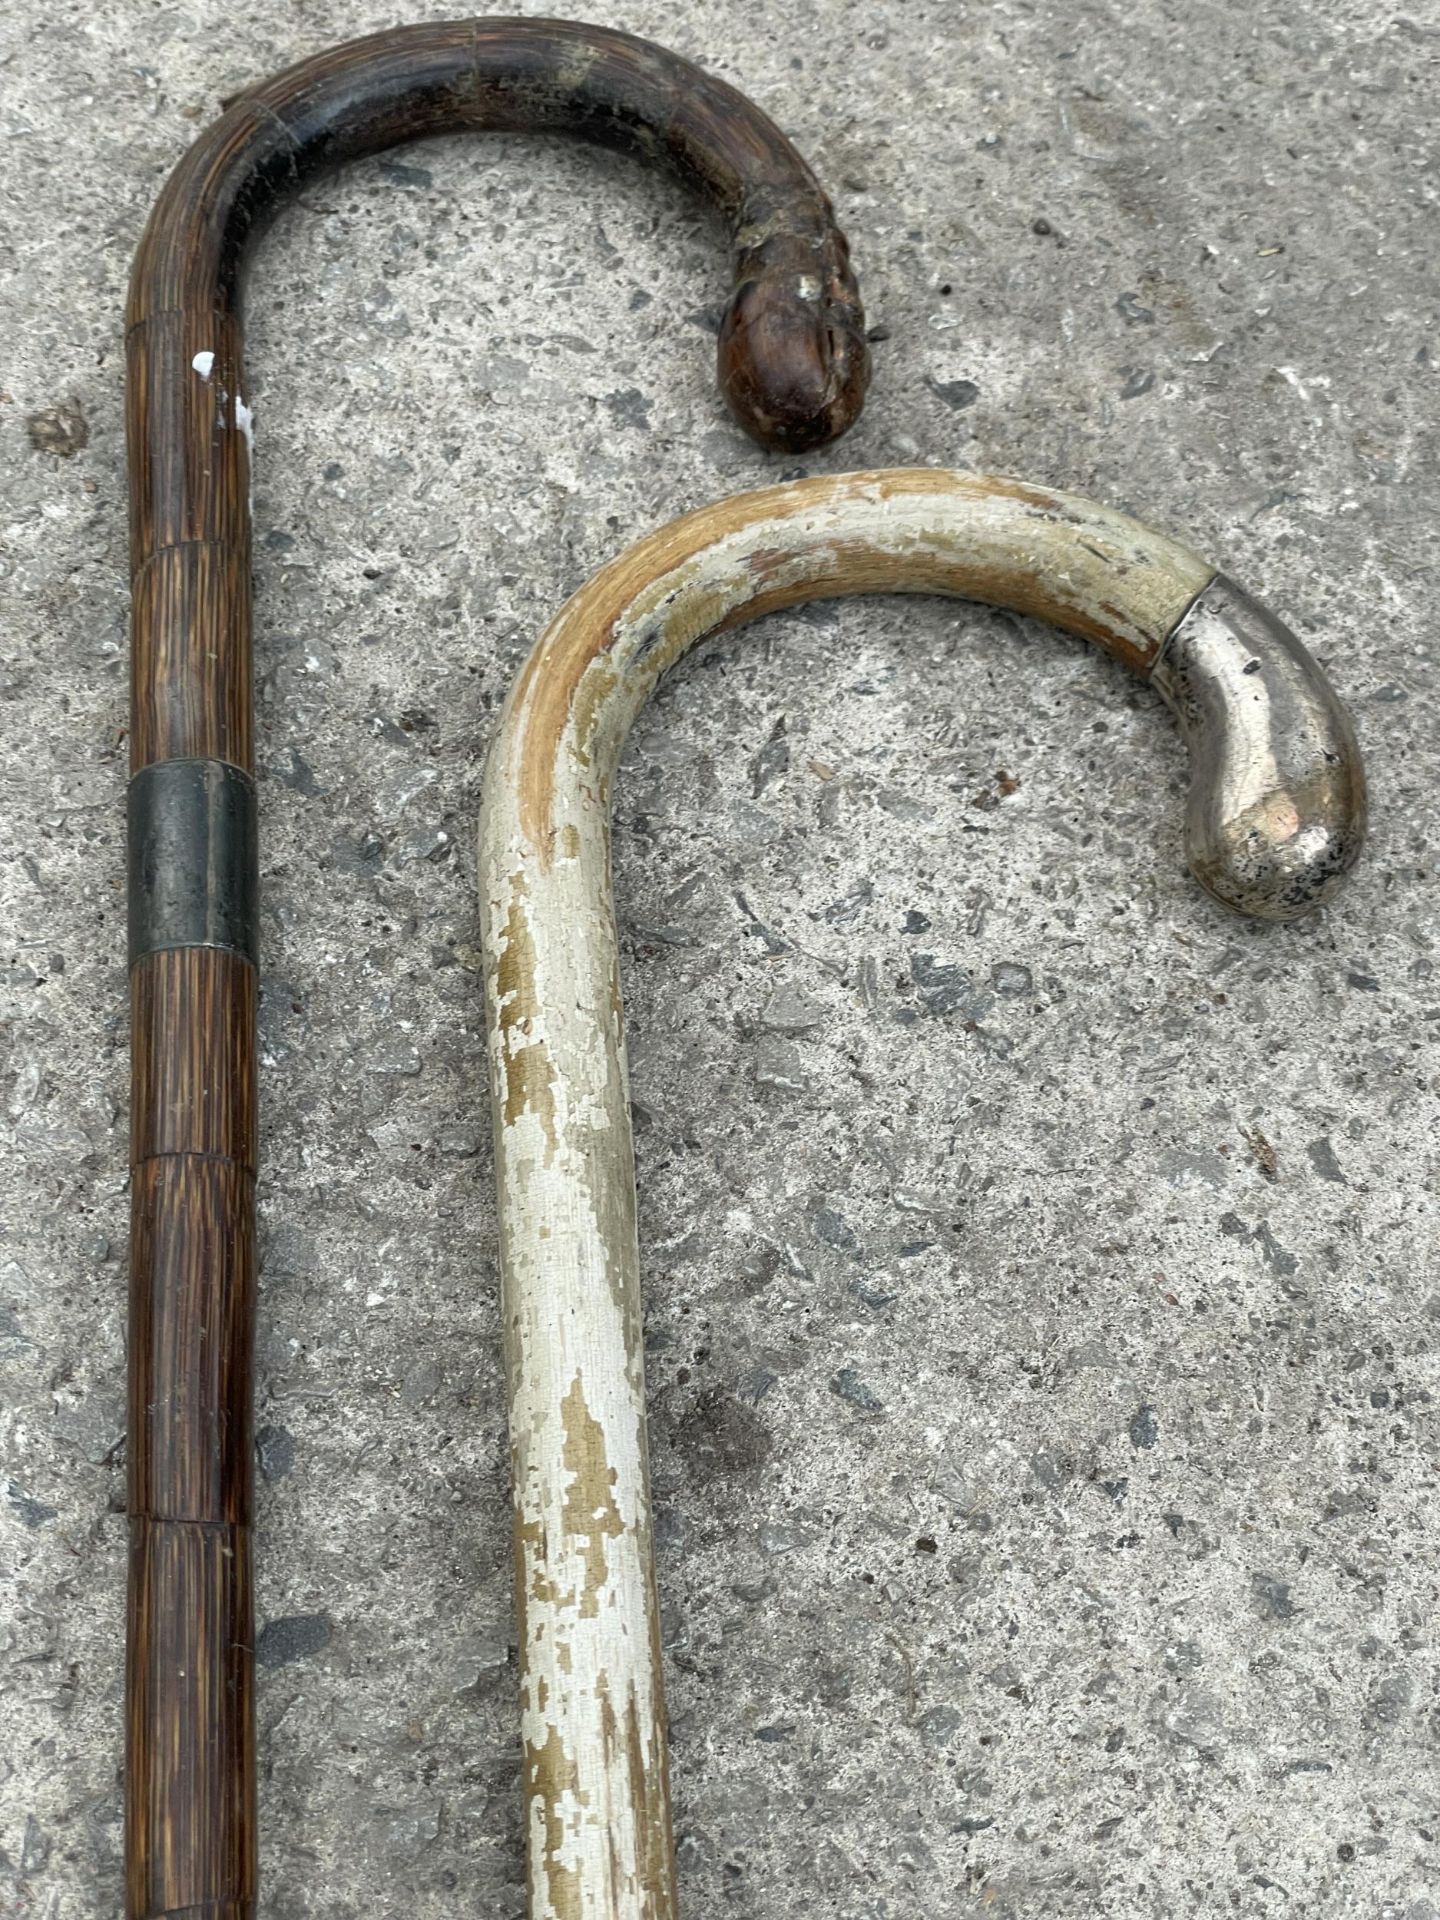 TWO WALKING STICKS, OINE WITH A HALLMARKED SILVER HANDLE AND THE OTHER WITH A HALLMARKED SILVER - Image 2 of 3